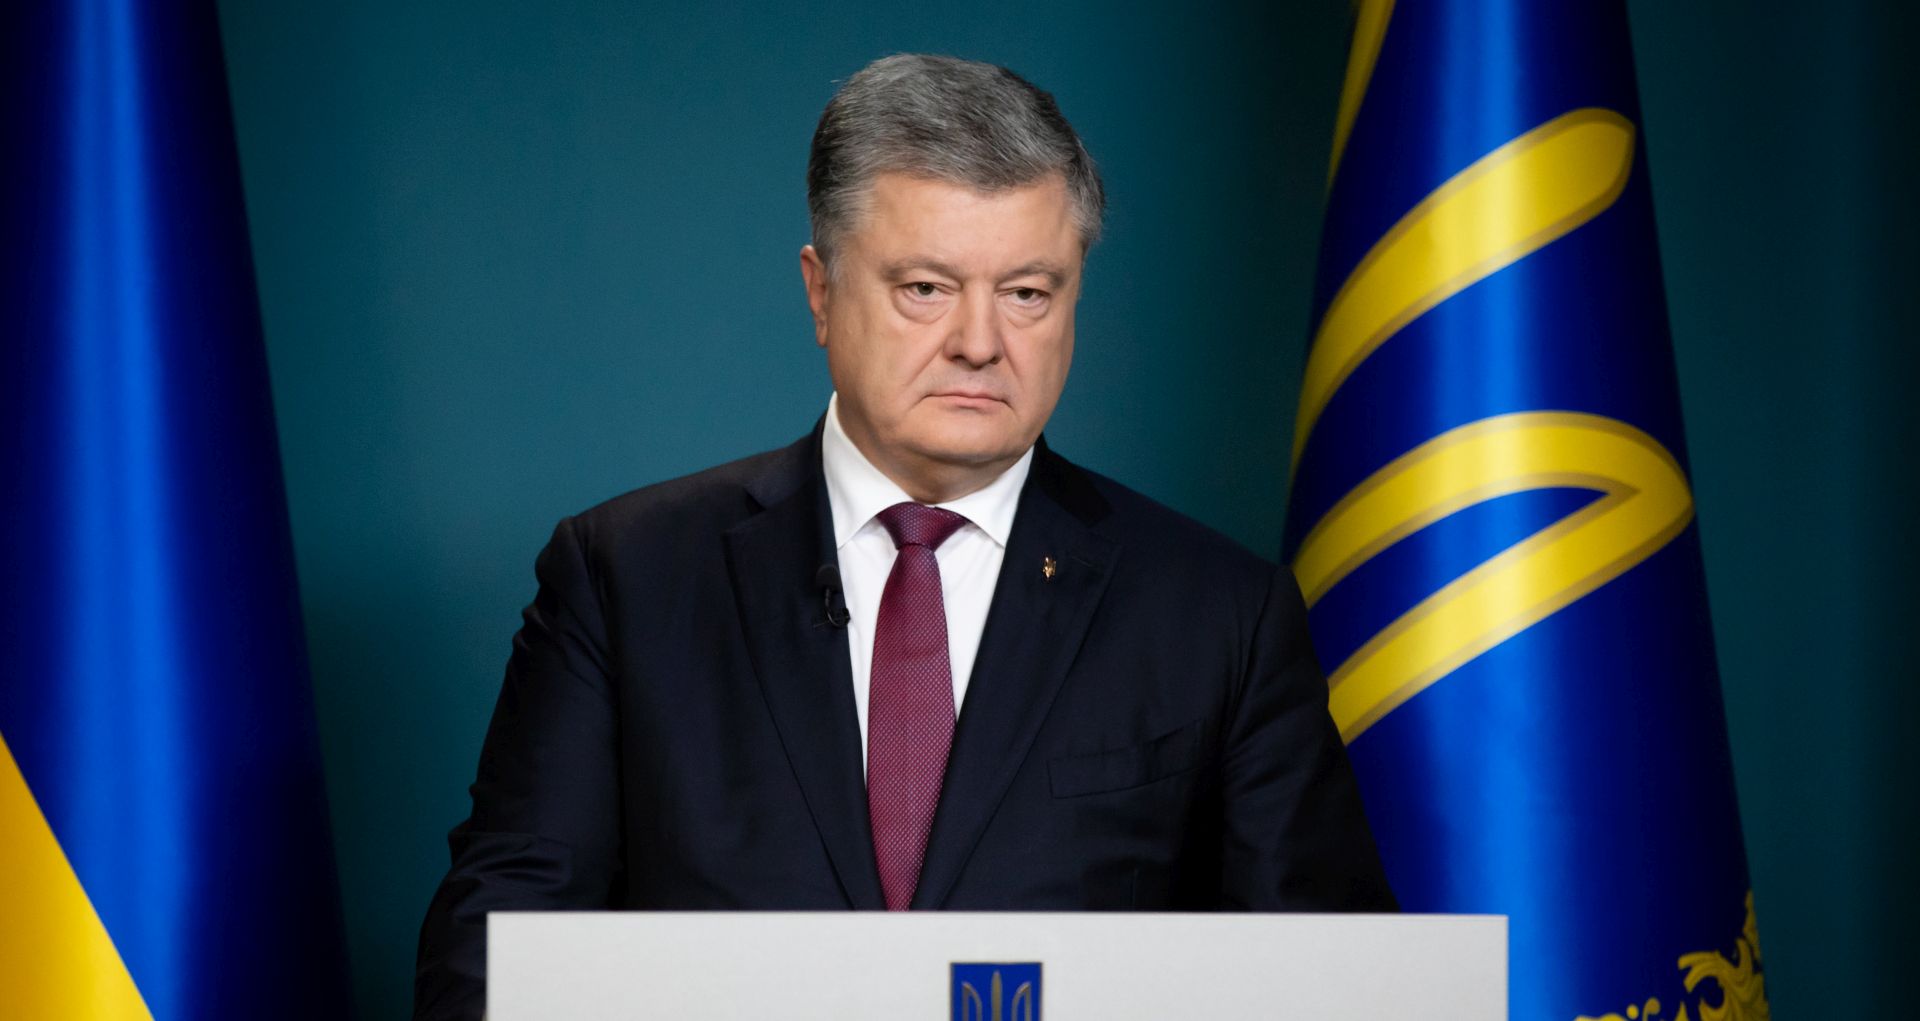 epa07194381 Ukrainian President Petro Poroshenko speaks during his interview by the CNN channel in Kiev, Ukraine, 28 November 2018. The need to introduce martial law in Ukraine is due to the threat of a full-scale war with Russia, Ukrainian President Petro Poroshenko said during an interview with Ukrainian TV channels. We have clear data that the attack on Ukrainian Navy boats is only the beginning, Poroshenko told journalists, as local media report. Ukrainian Parliament approved the presidential decree on imposing a 30-day martial law in several regions of Ukraine on 26 November 2018. The law stipulates that martial law is introduced in the Vinnytsia, Luhansk, Mykolaiv, Odesa, Sumy, Kharkiv, Chernihiv, Donetsk, Zaporizhia, and Kherson regions, as well as in the internal waters of the Azov-Kerch water area of Ukraine.  EPA/MIKHAIL PALINCHAK